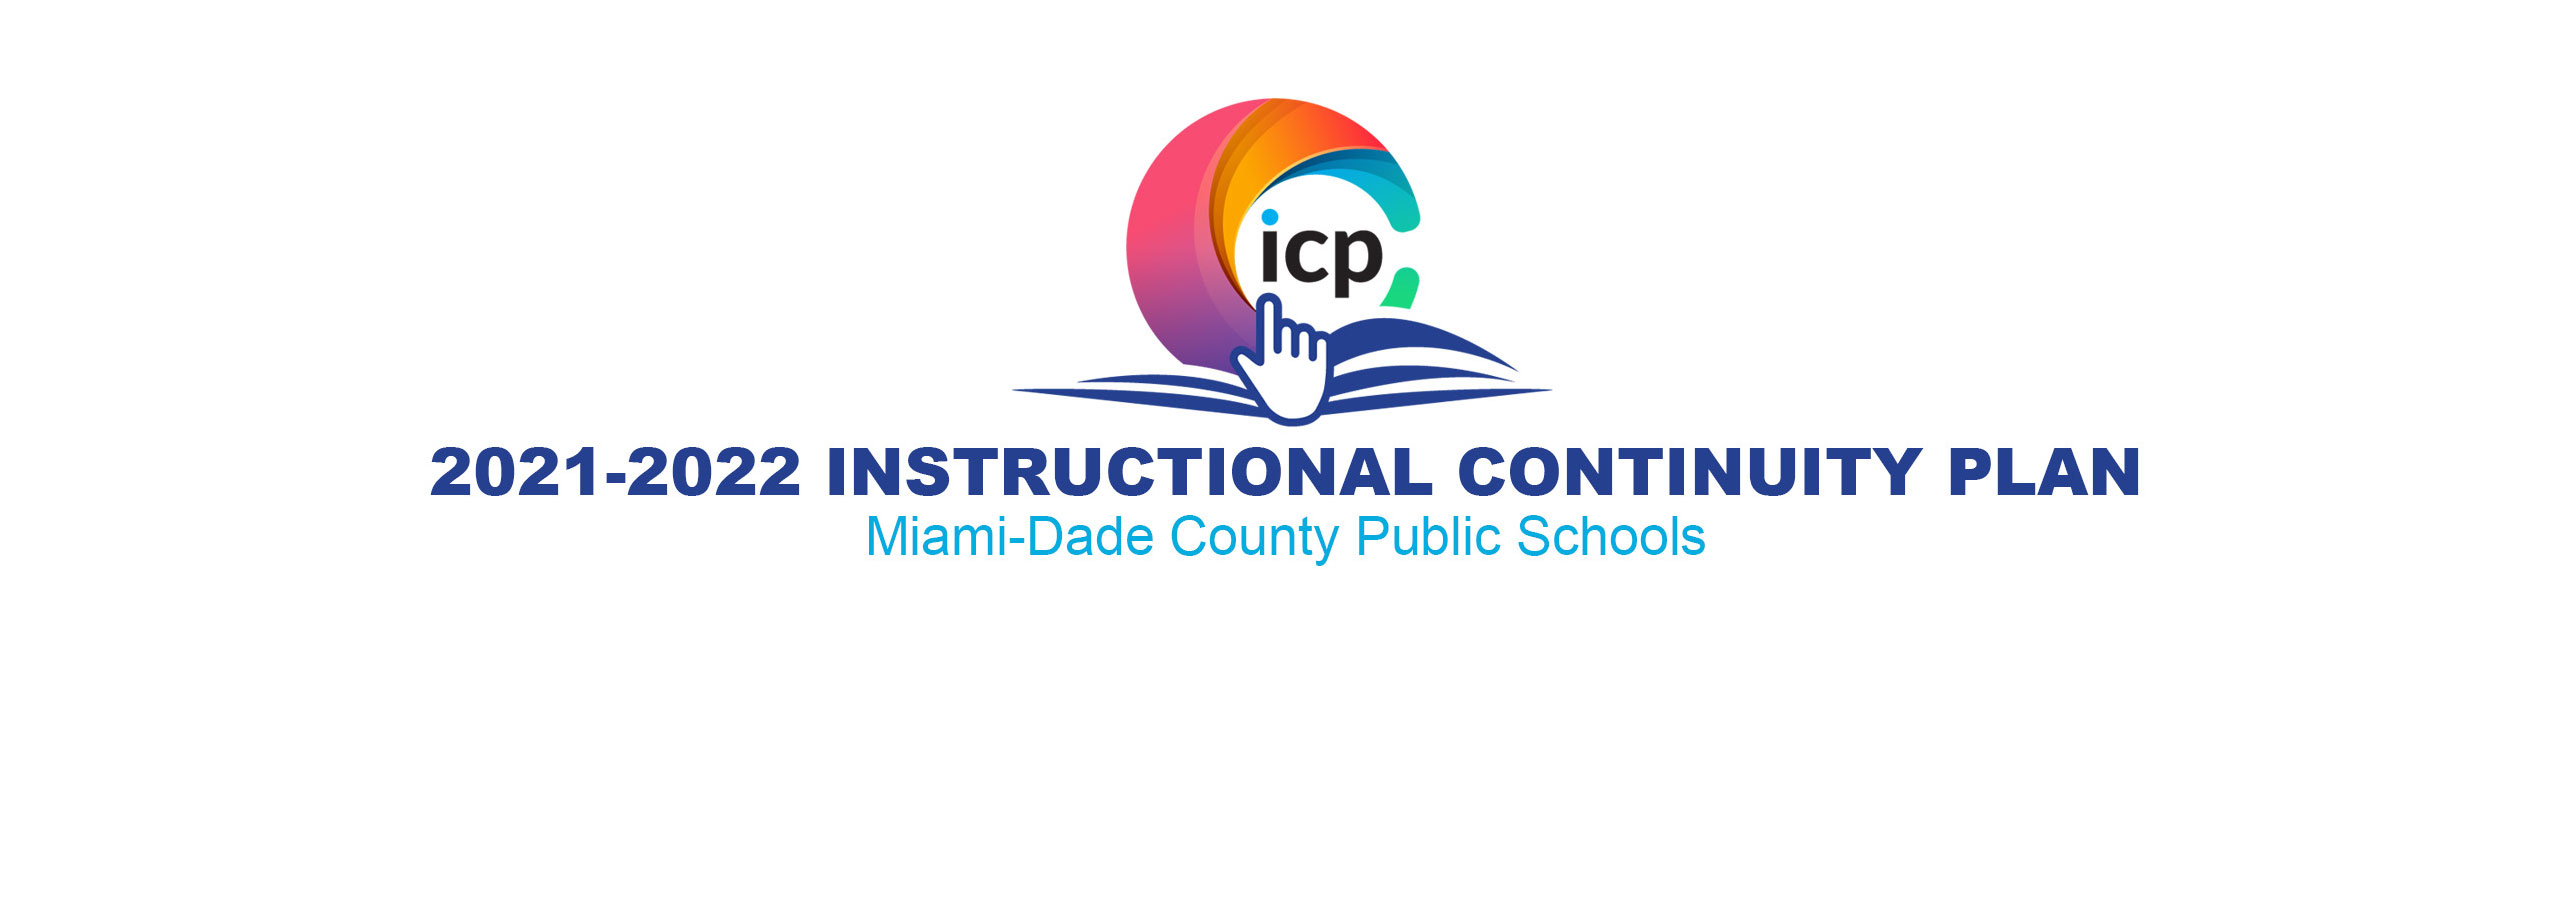 2021-2022 Instructional Continuity Plan